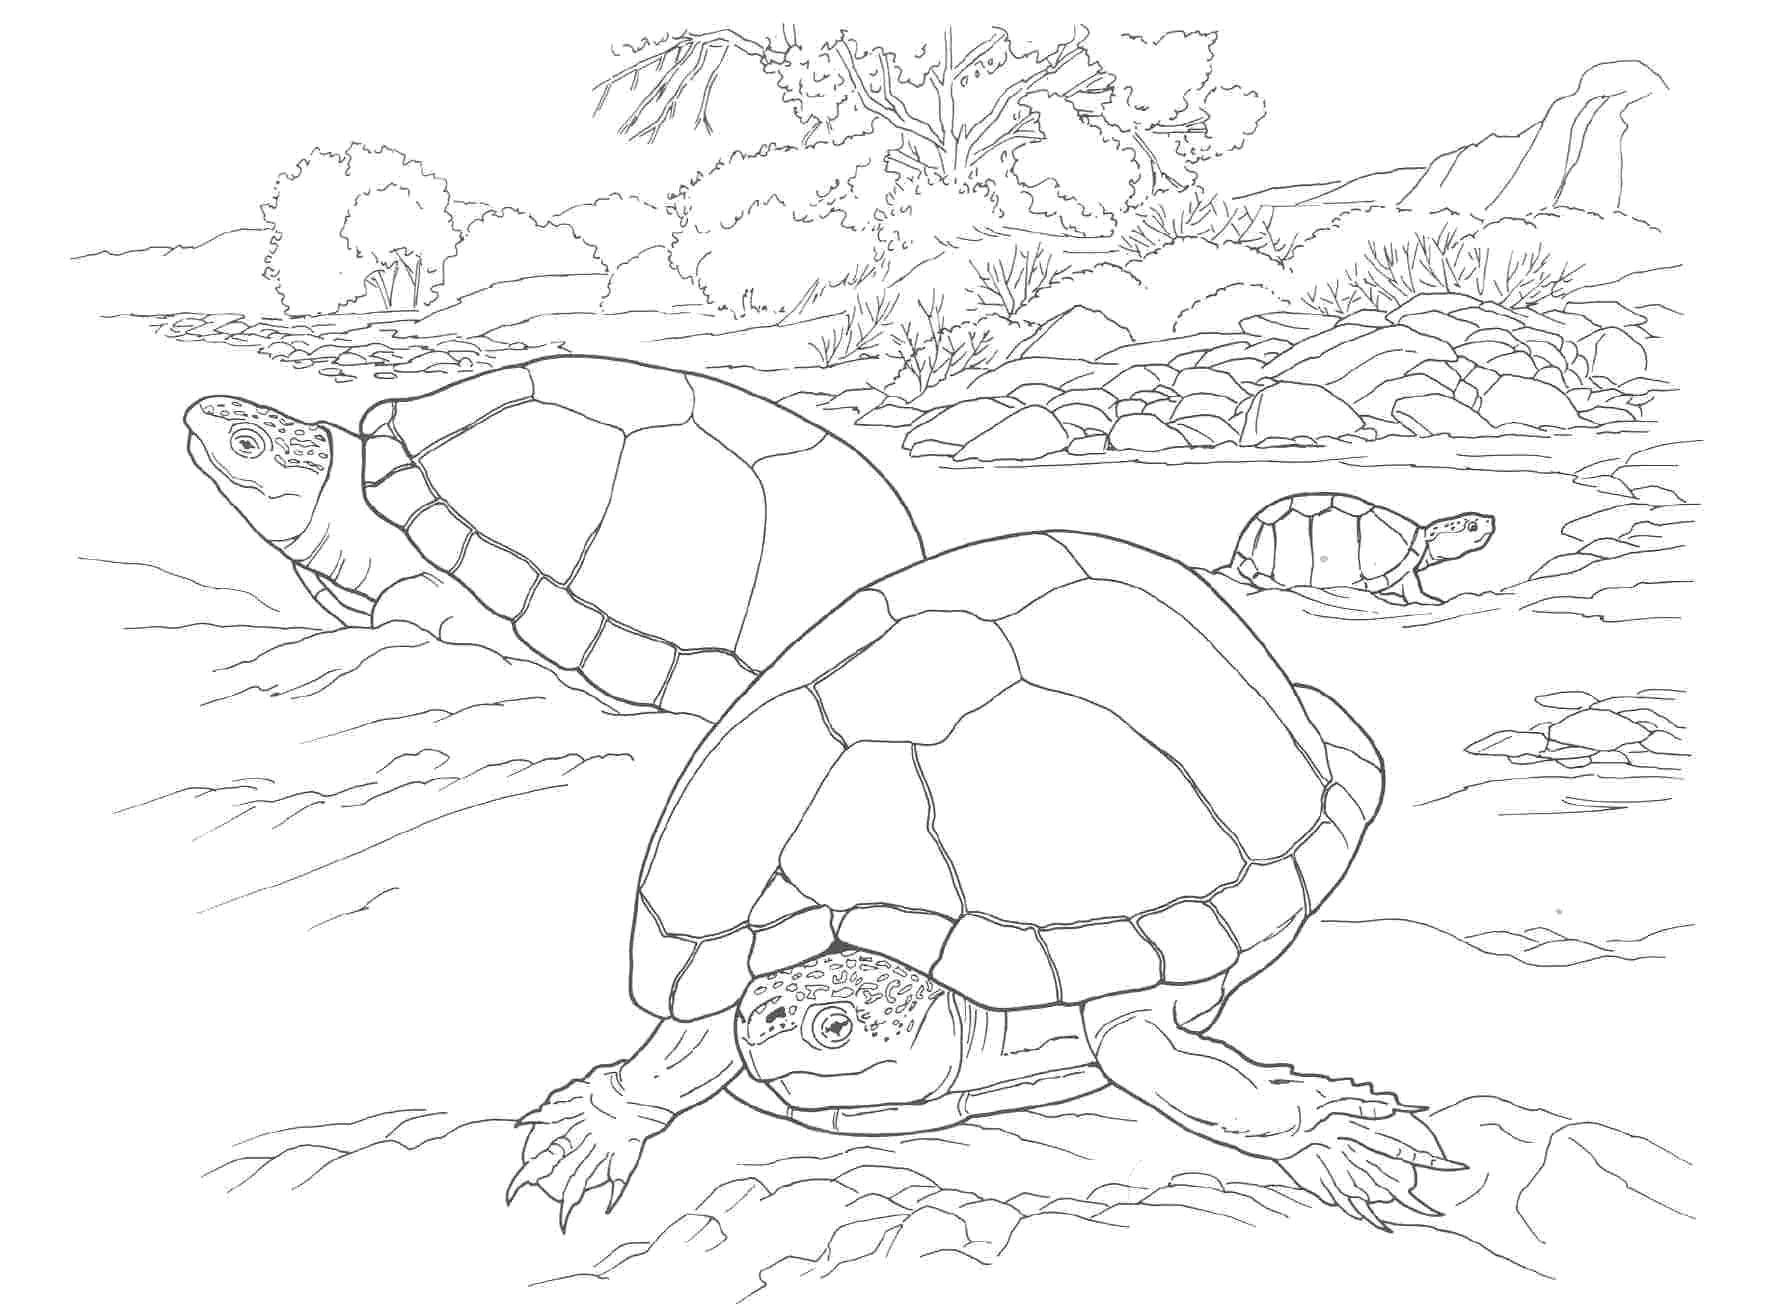 Coloring The wise turtle. Category reptiles. Tags:  Reptile, turtle.